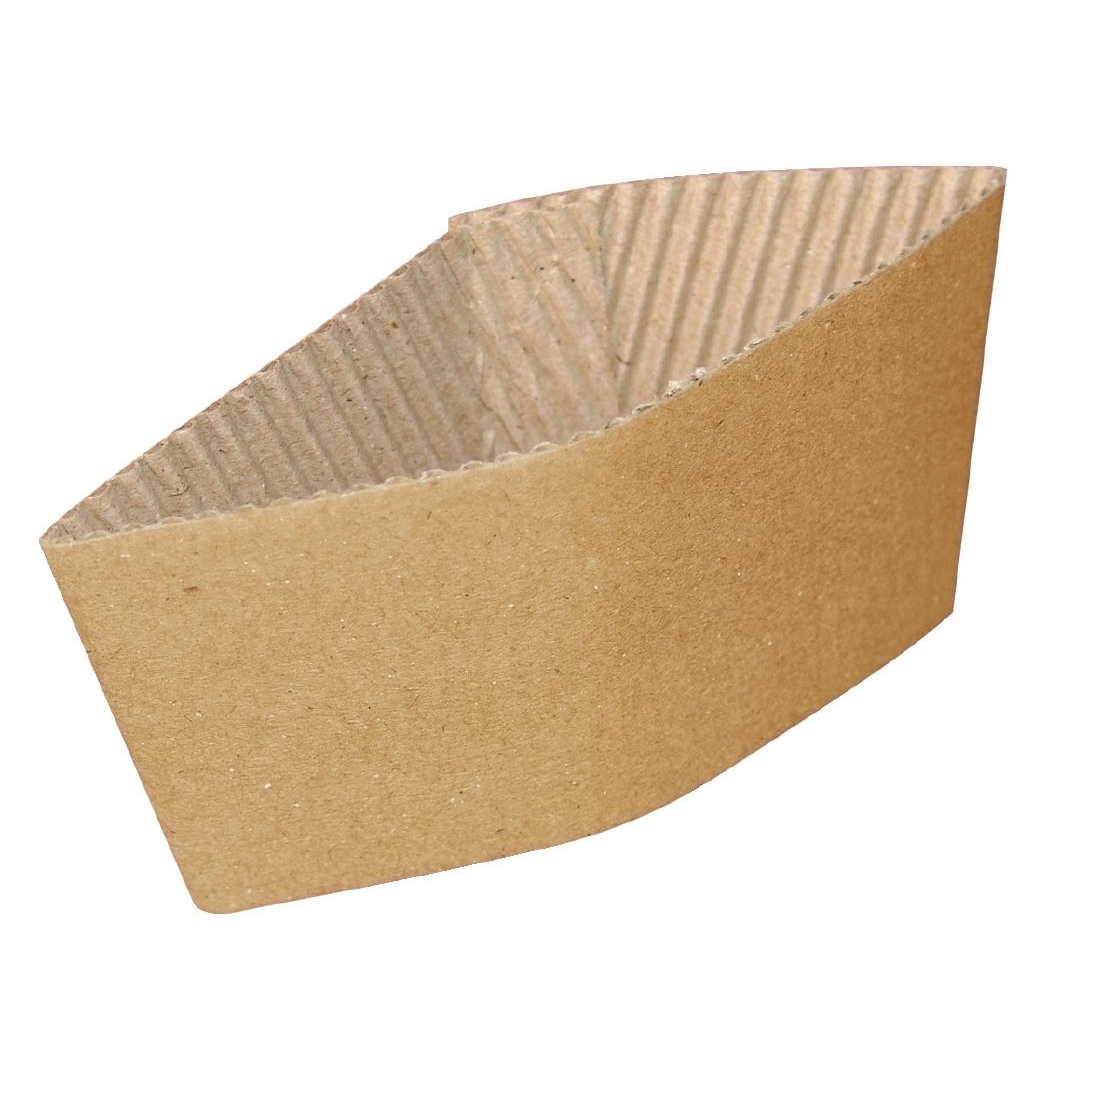 Corrugated Cup Sleeves for 12/16oz Cups